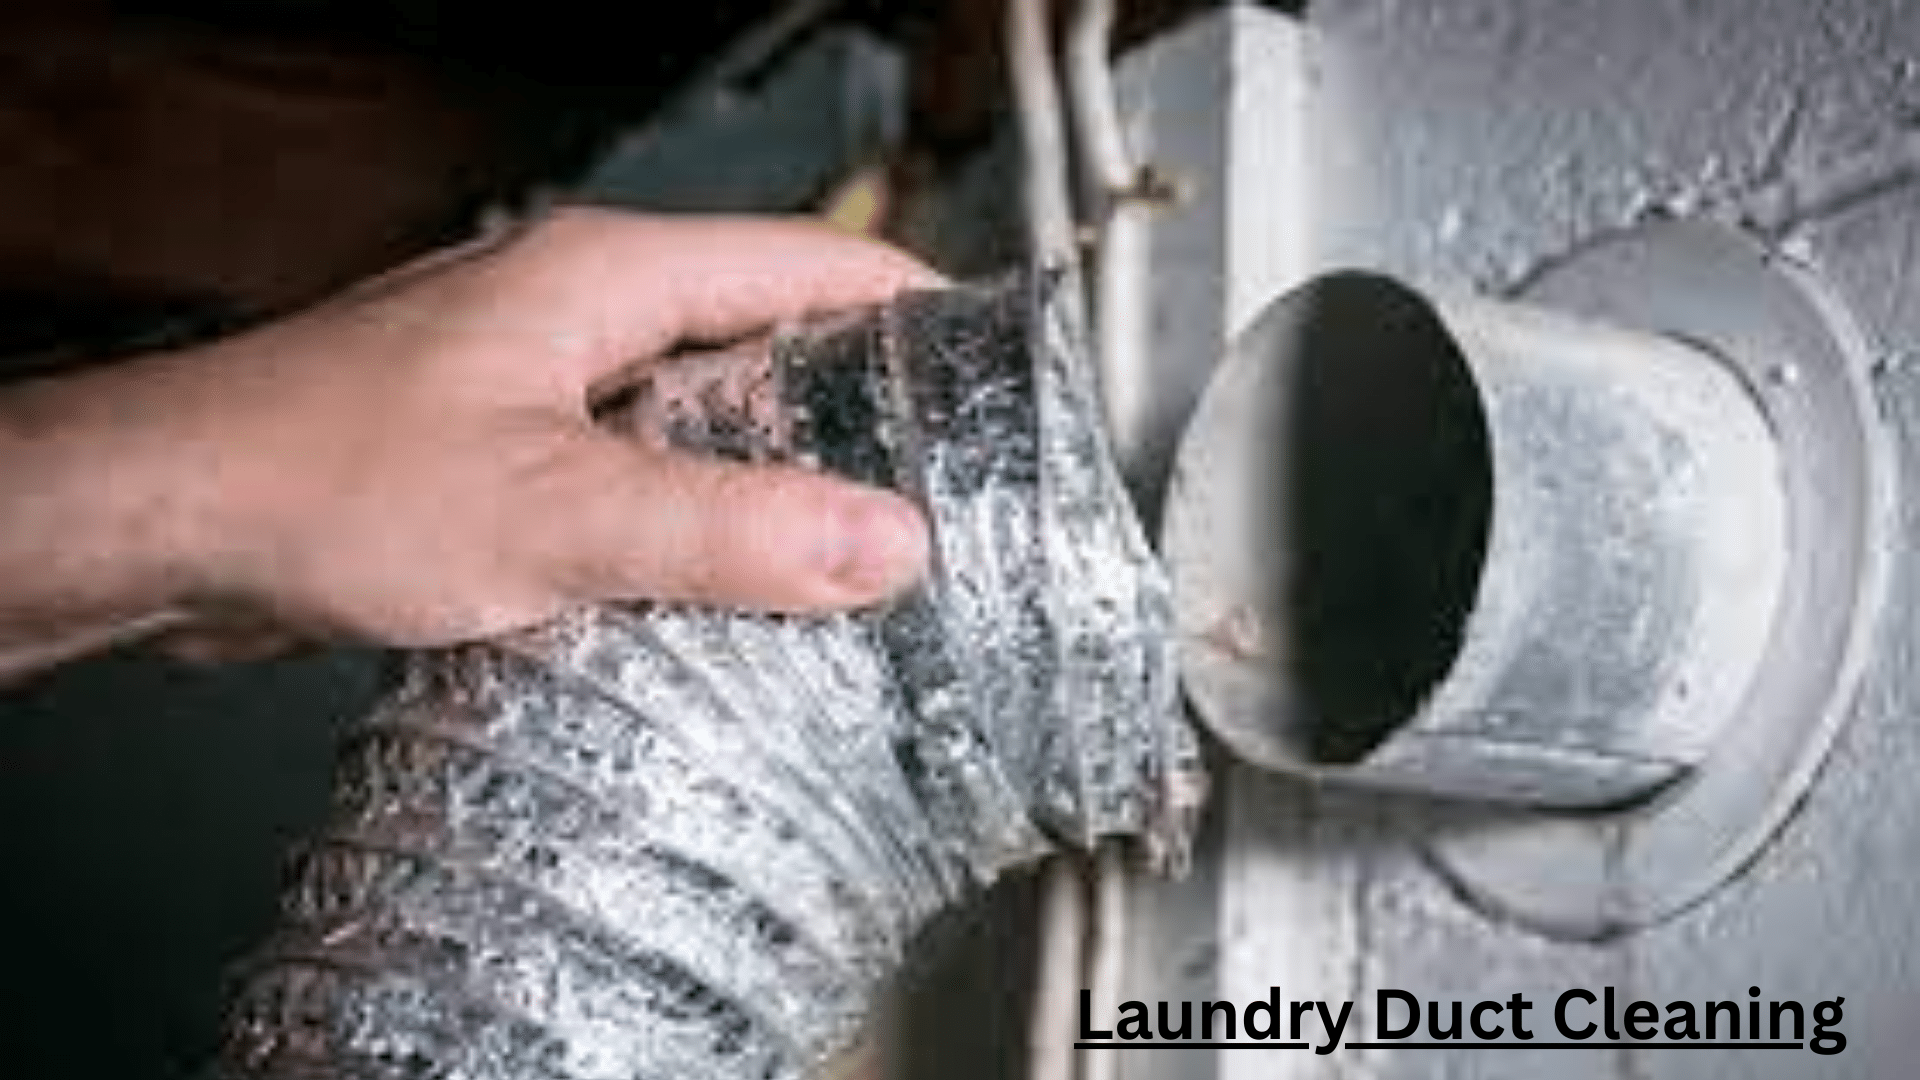 Laundry Duct Cleaning Services